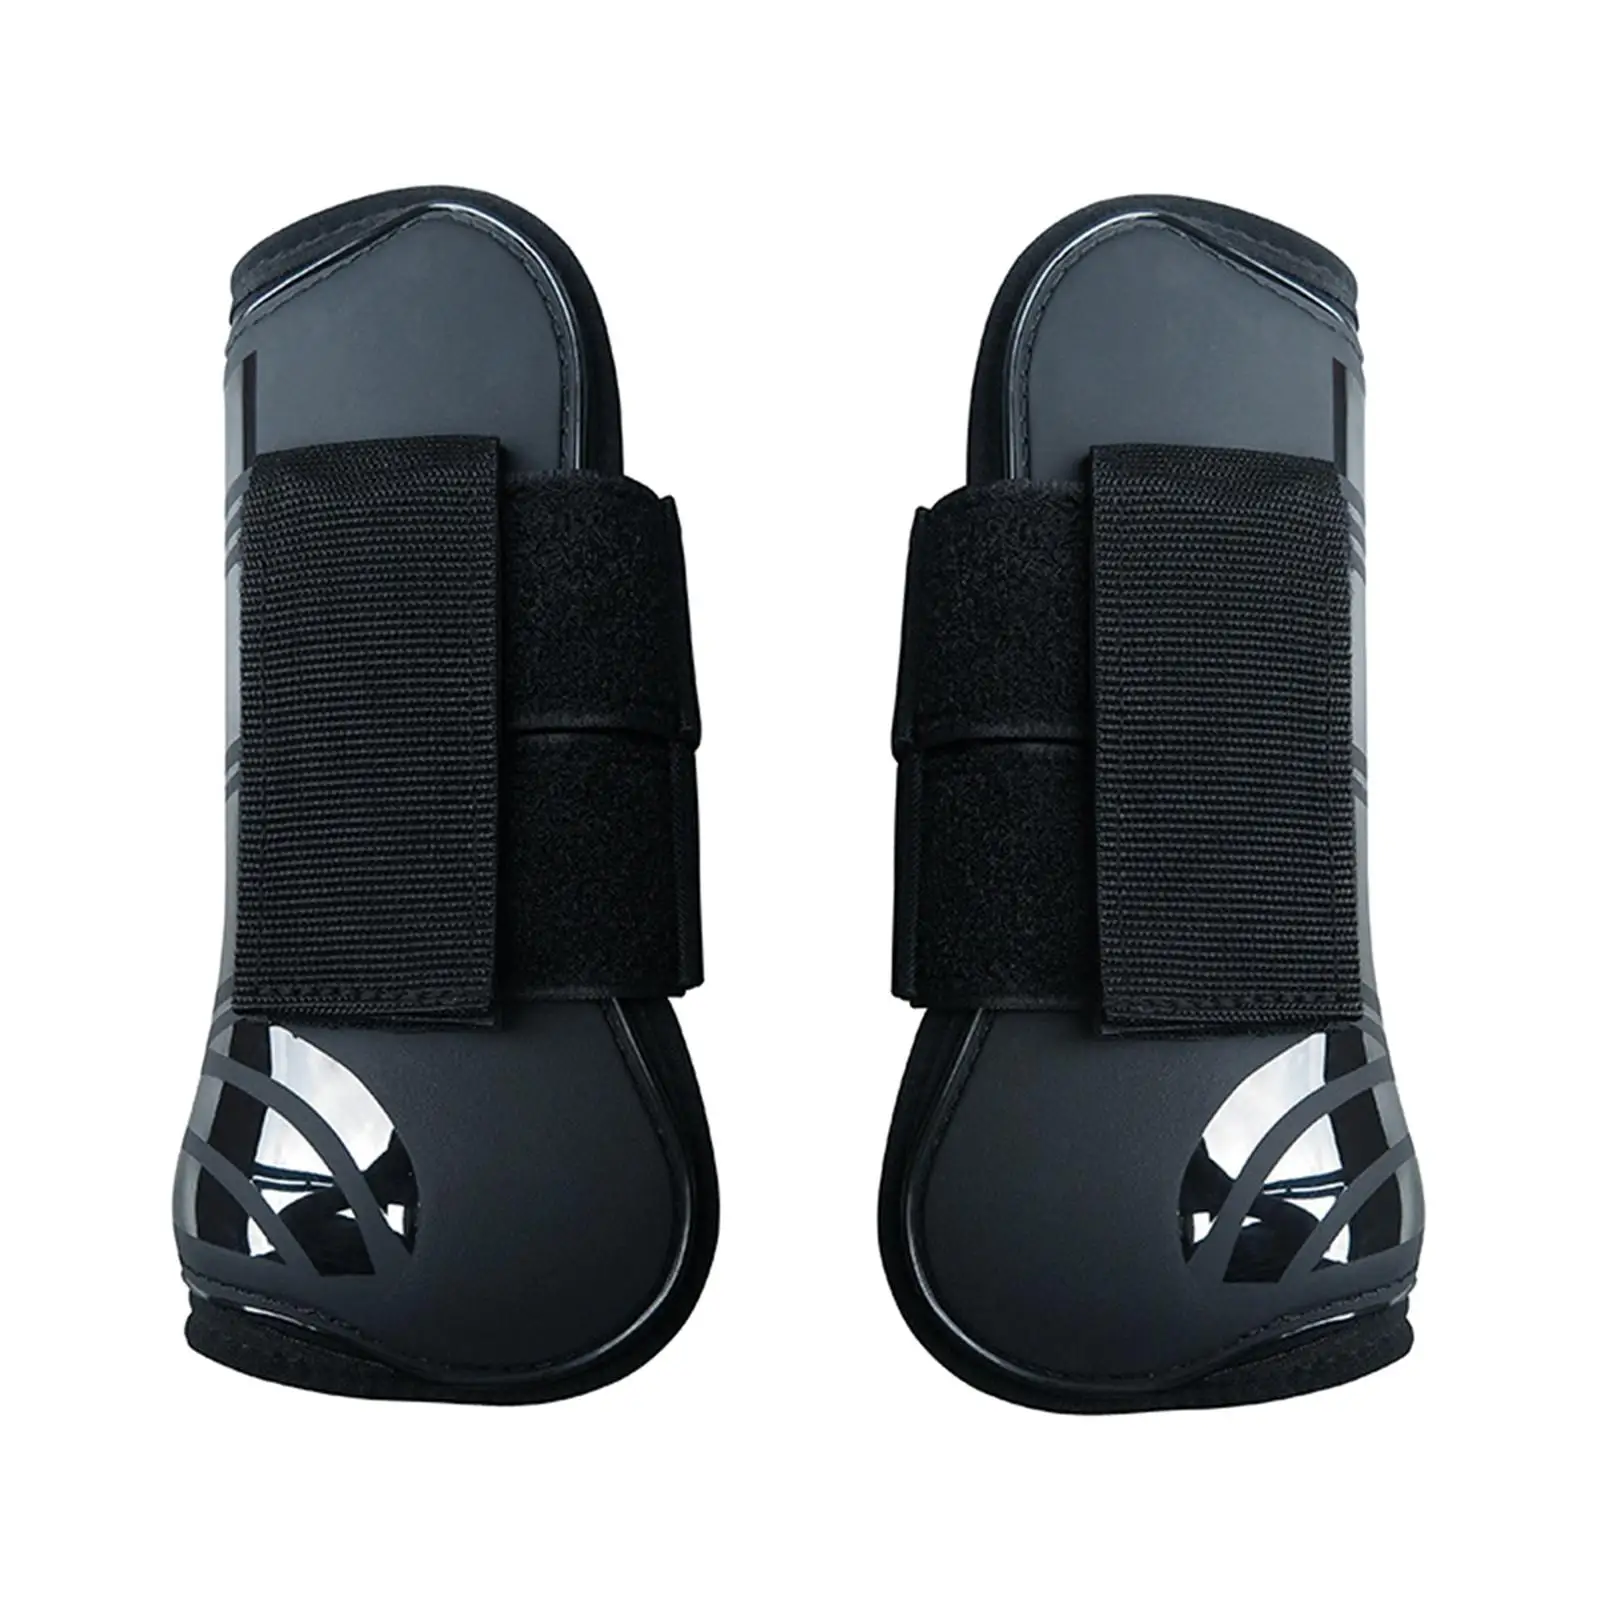 Horse Tendon Fetlock Boots Jumping Front Hind Leg Protection Gear